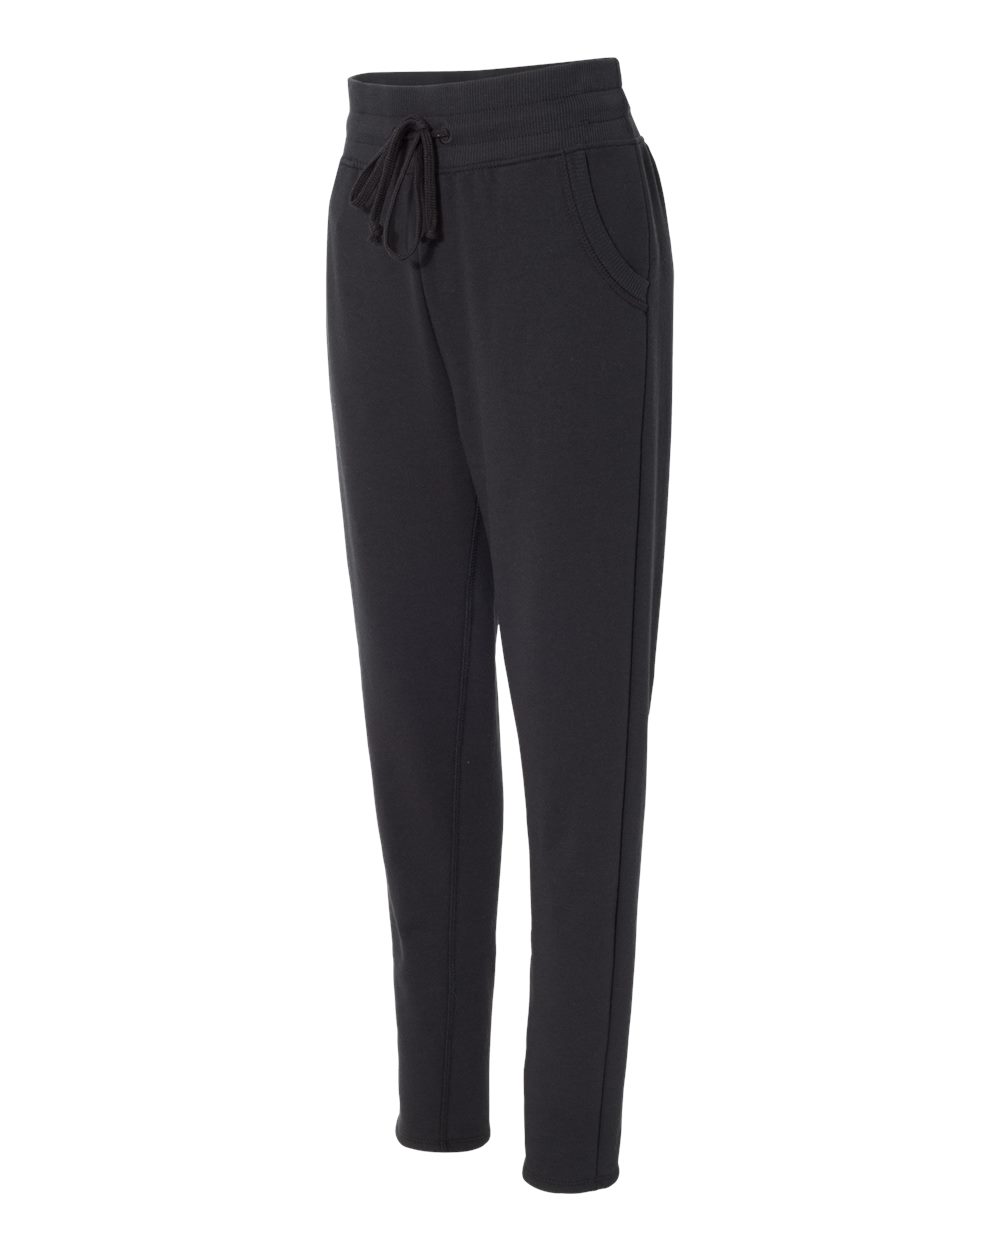 Alternative 5080 - Women's Vintage Sport French Terry Relay Race Pants